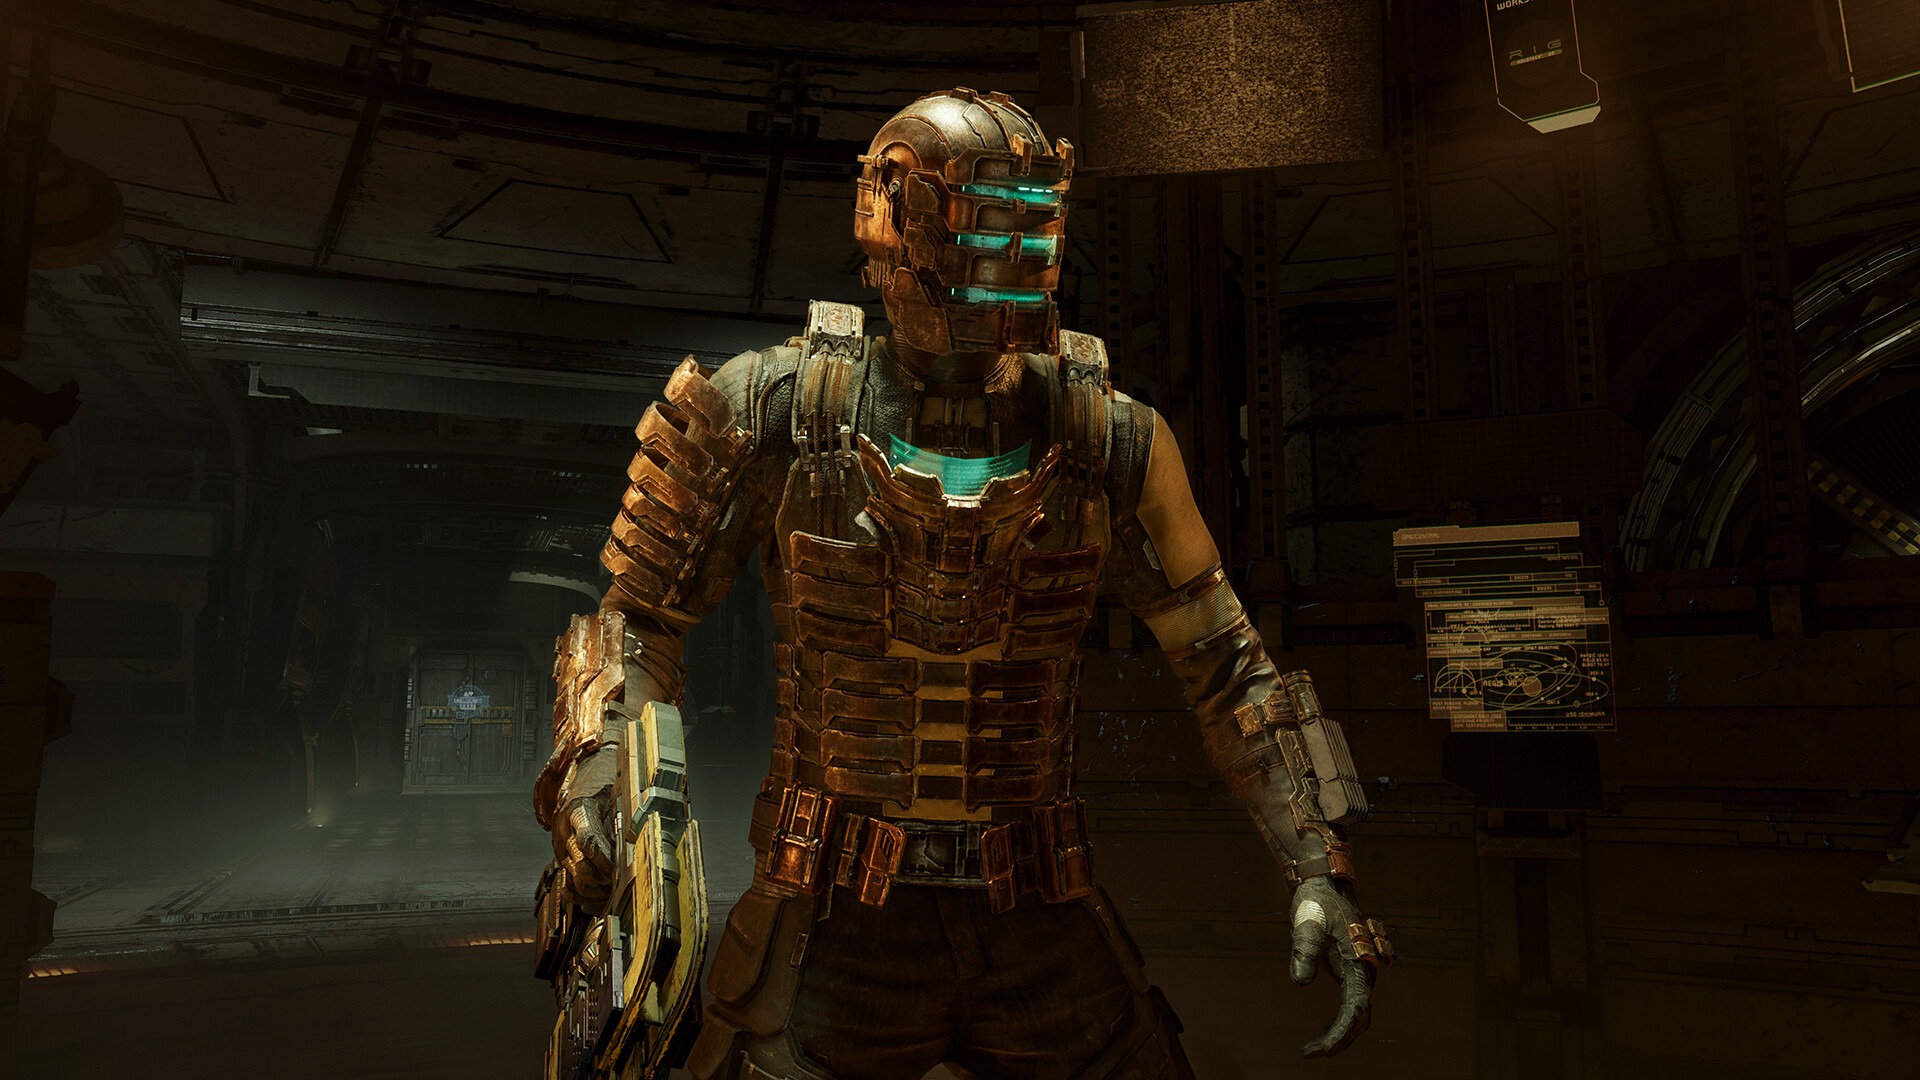 Dead Space remake all suit upgrades, locations, and unlock conditions